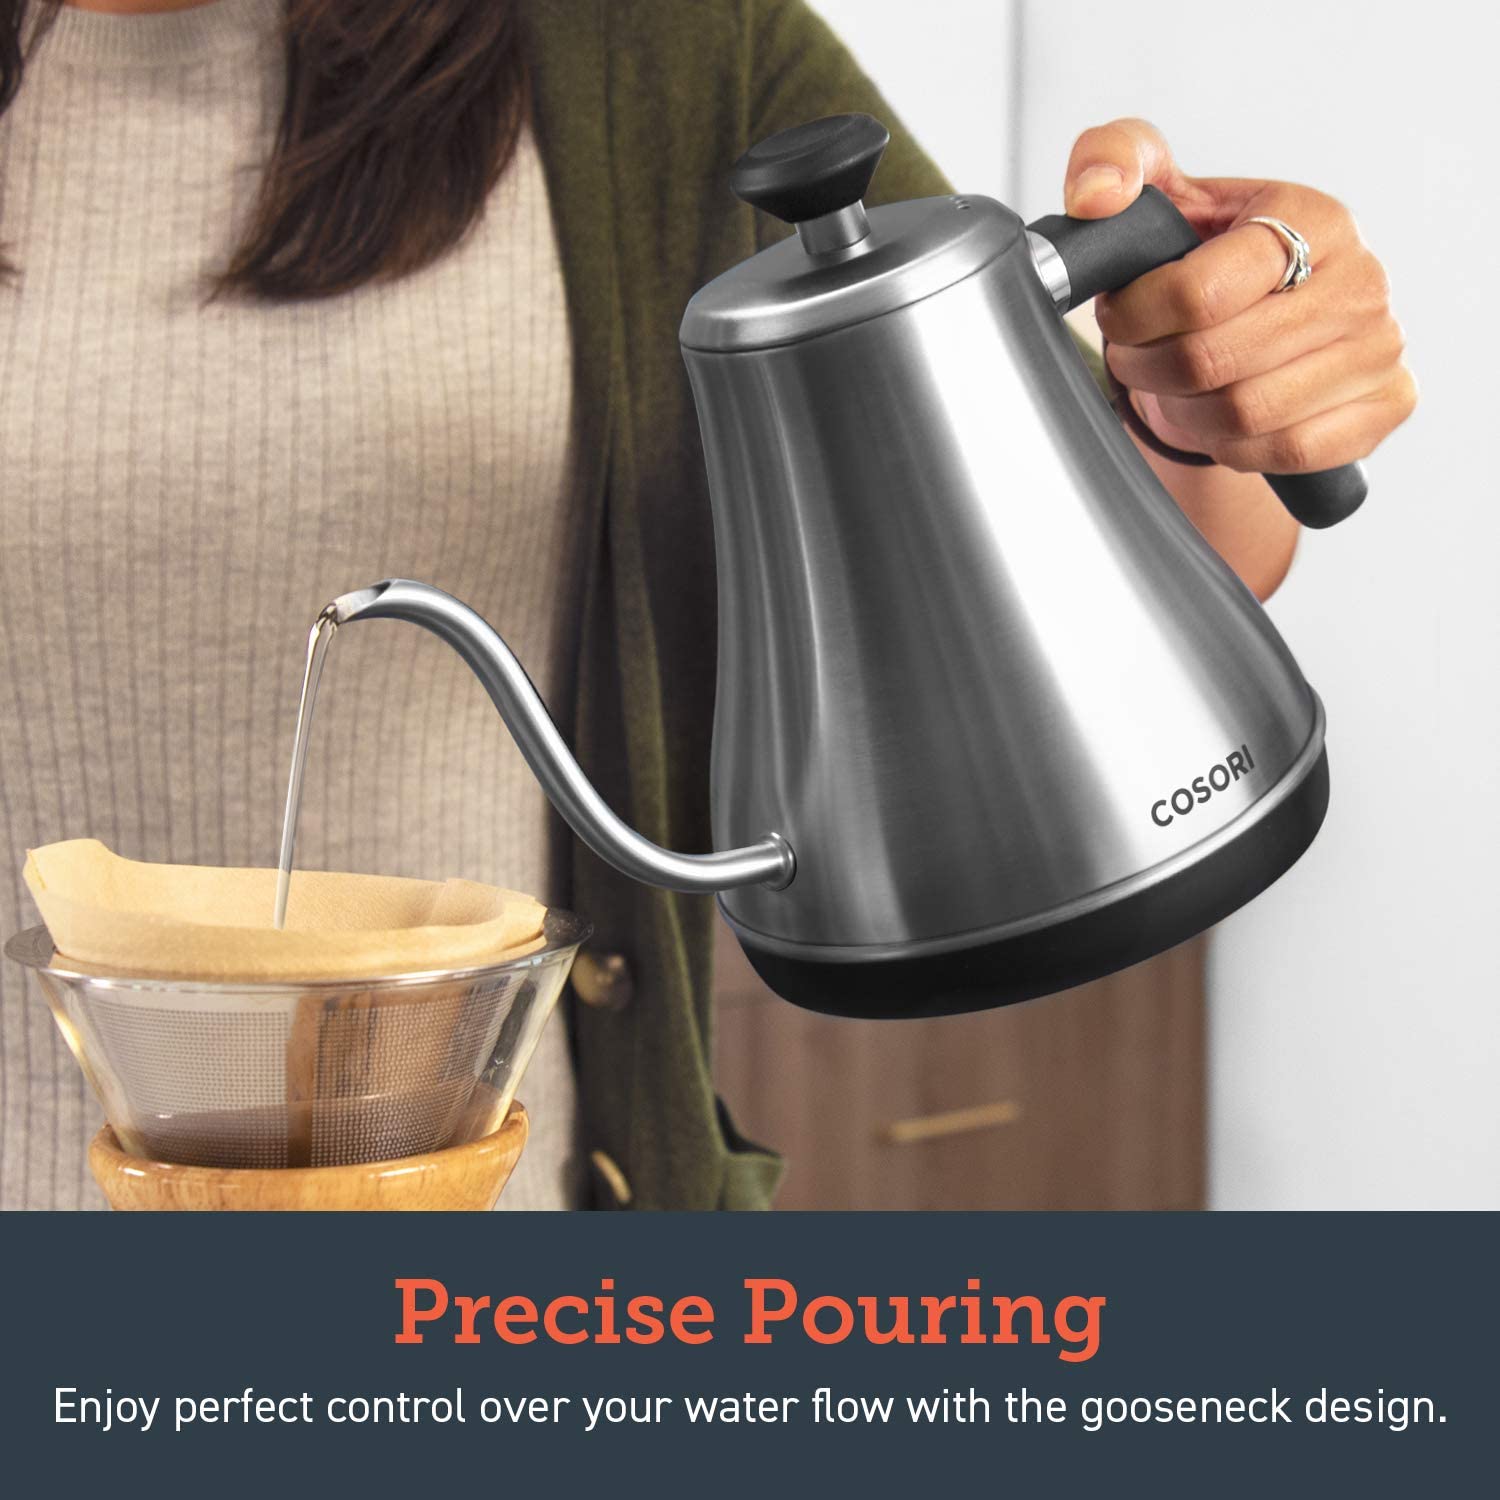 https://bigbigmart.com/wp-content/uploads/2023/05/COSORI-Electric-Gooseneck-Kettle-with-5-Variable-Presets-Pour-Over-Kettle-Coffee-Kettle-100-Stainless-Steel-Inner-Lid-Bottom-1200-Watt-Quick-Heating-0.8L-Silver-7.jpg